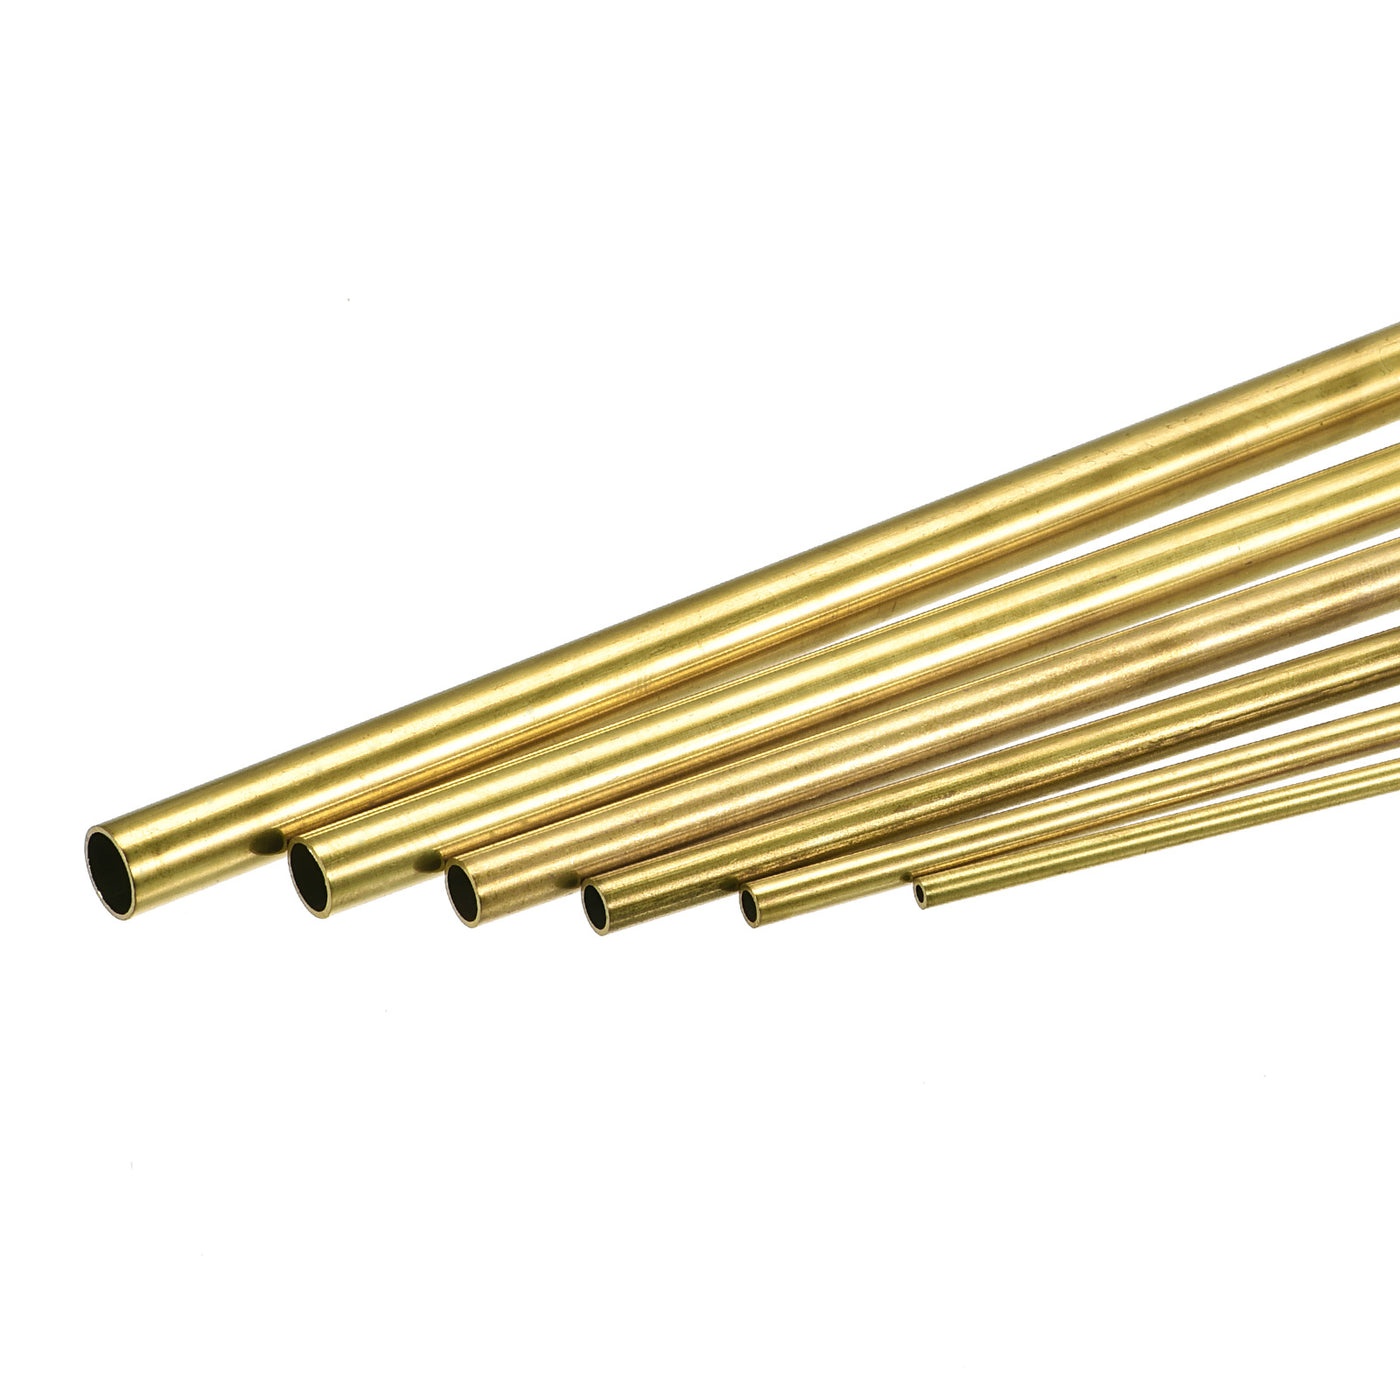 uxcell Uxcell Brass Tube, 3mm 4mm 5mm 6mm 7mm 8mm OD x 1mm Wall Thickness 200mm Length Metal Tubing, Pack of 6